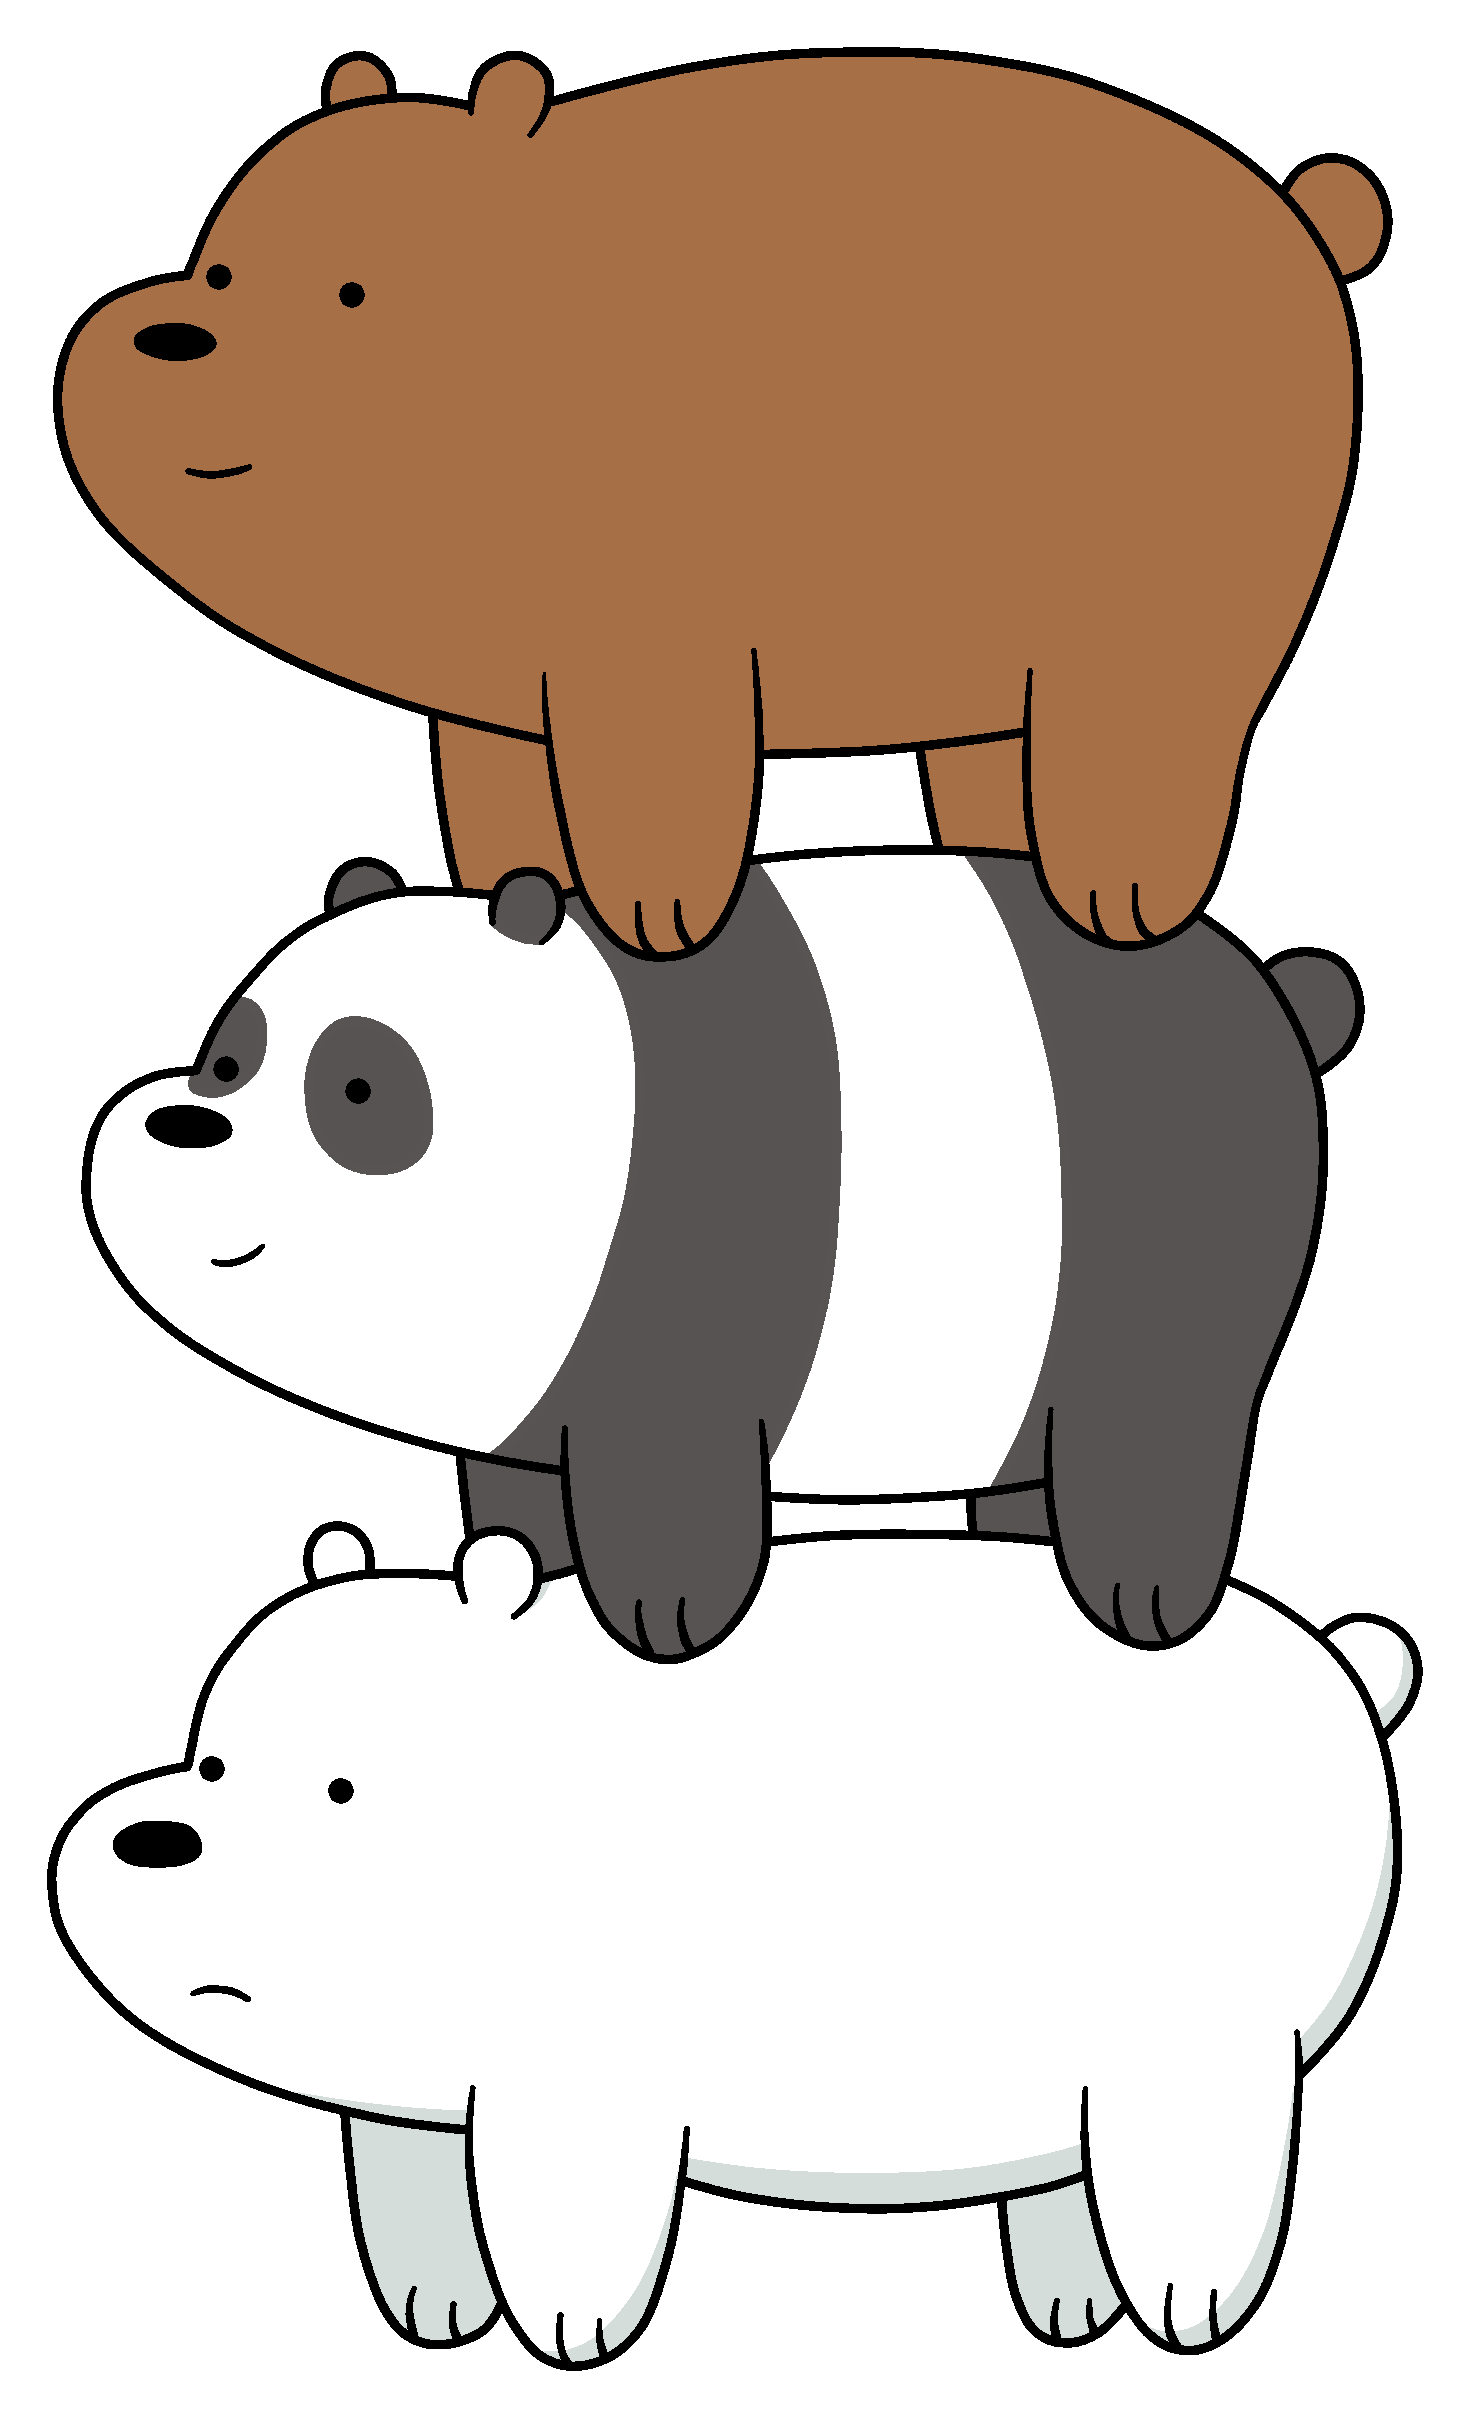 Here's a drawing I made of Ice Bear getting angry. What do you think? : r/ webarebears